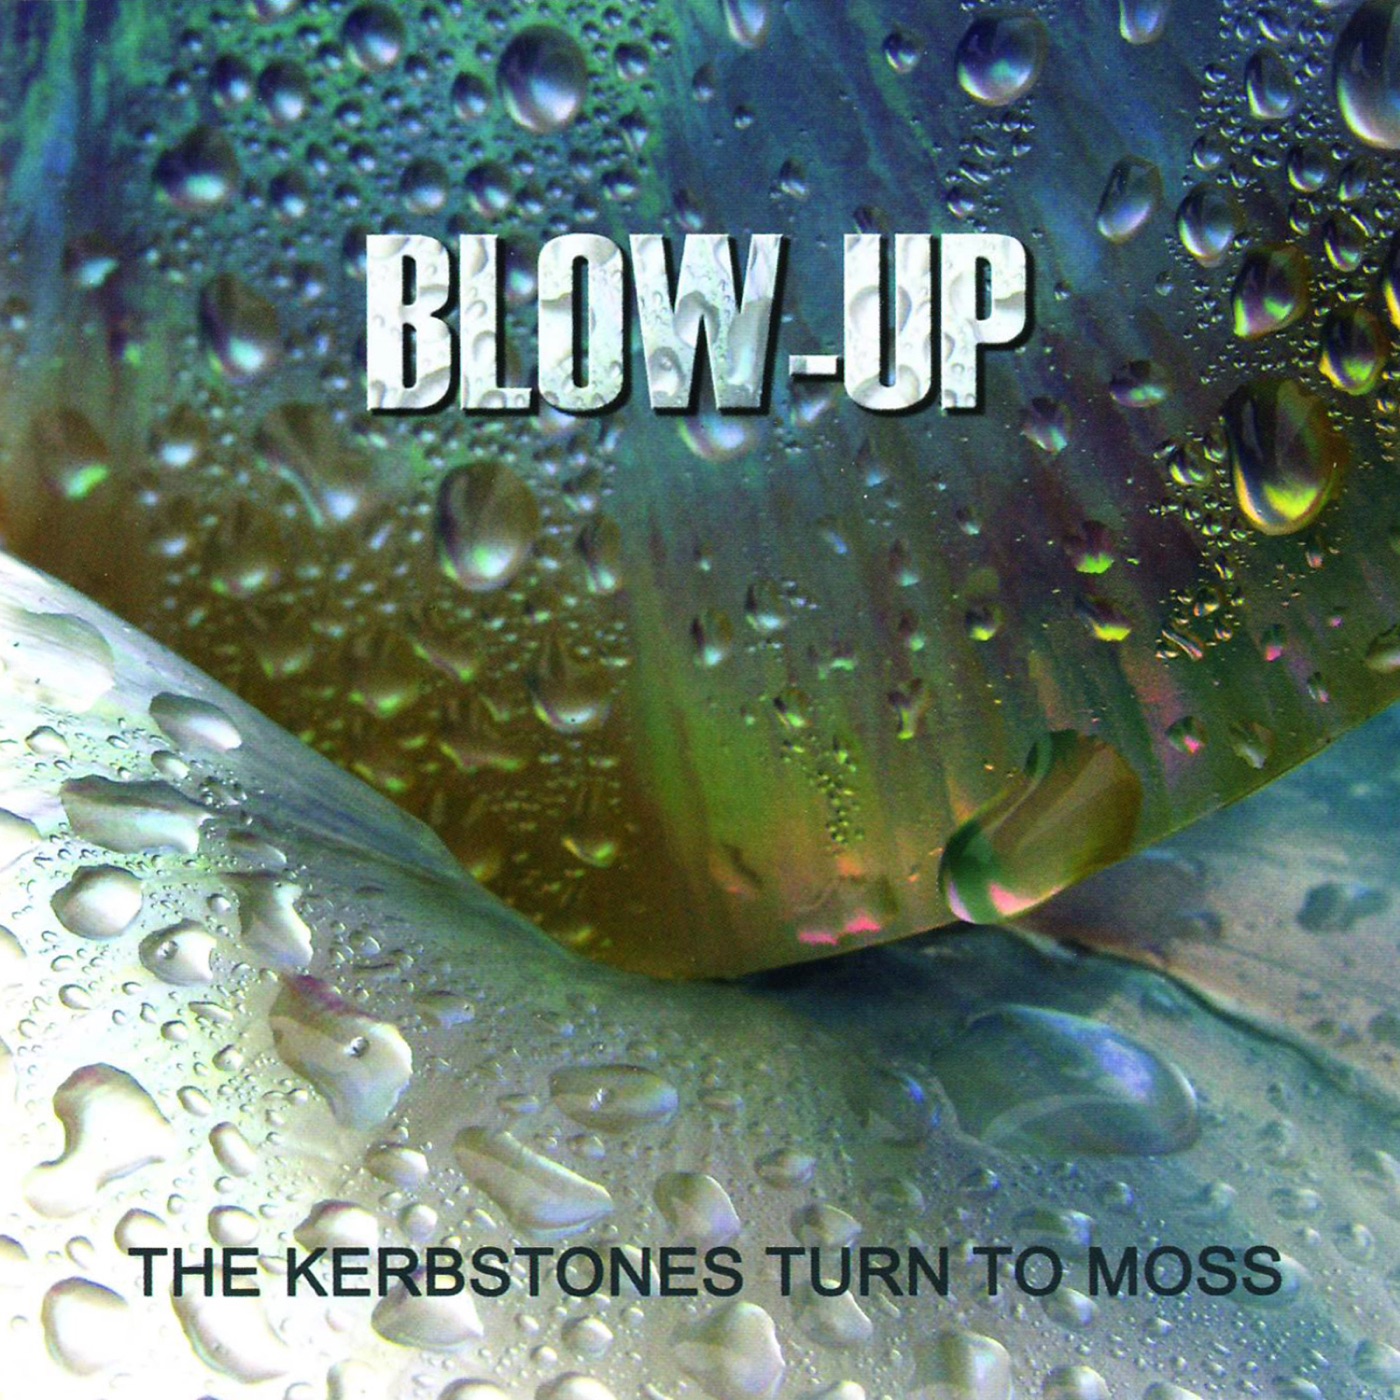 The Kerbstones Turn to Moss by BLOW-UP